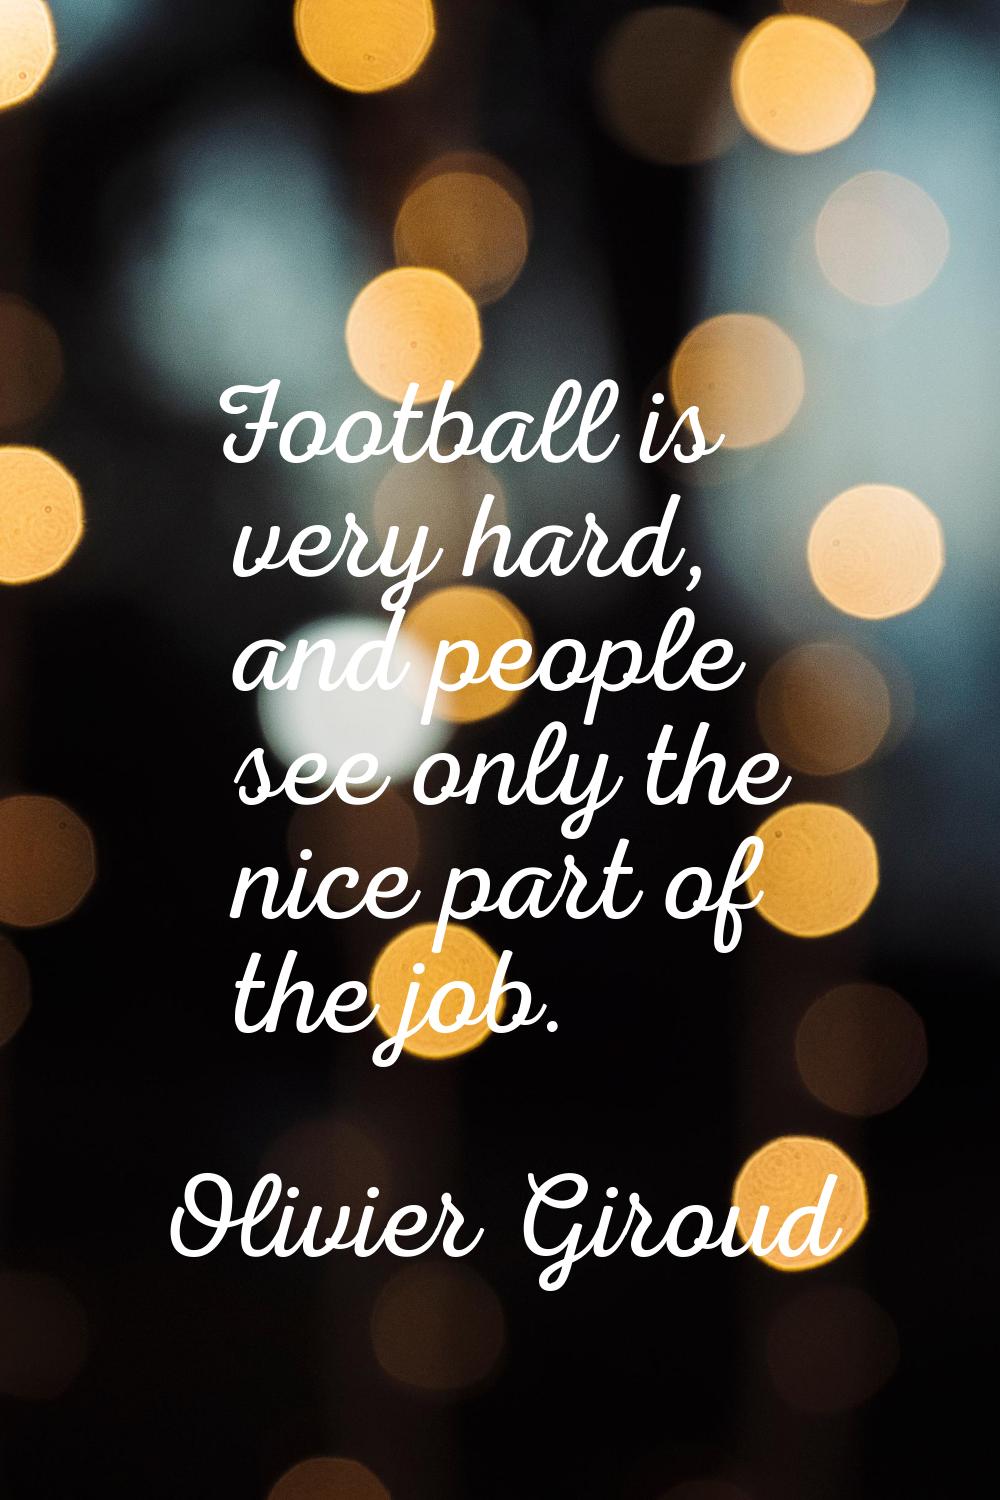 Football is very hard, and people see only the nice part of the job.